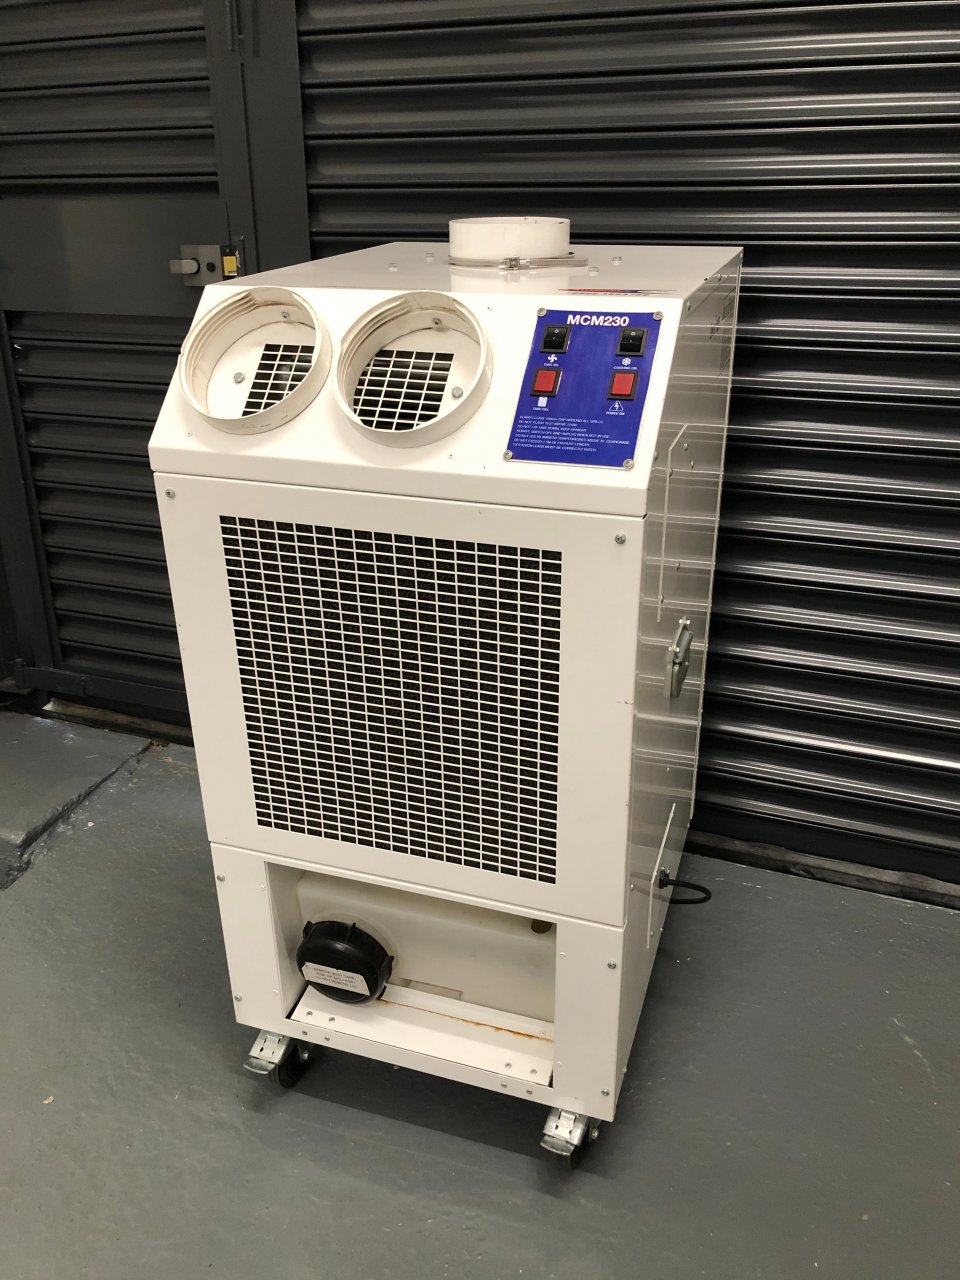 Portable AC Hire Services For Server Rooms